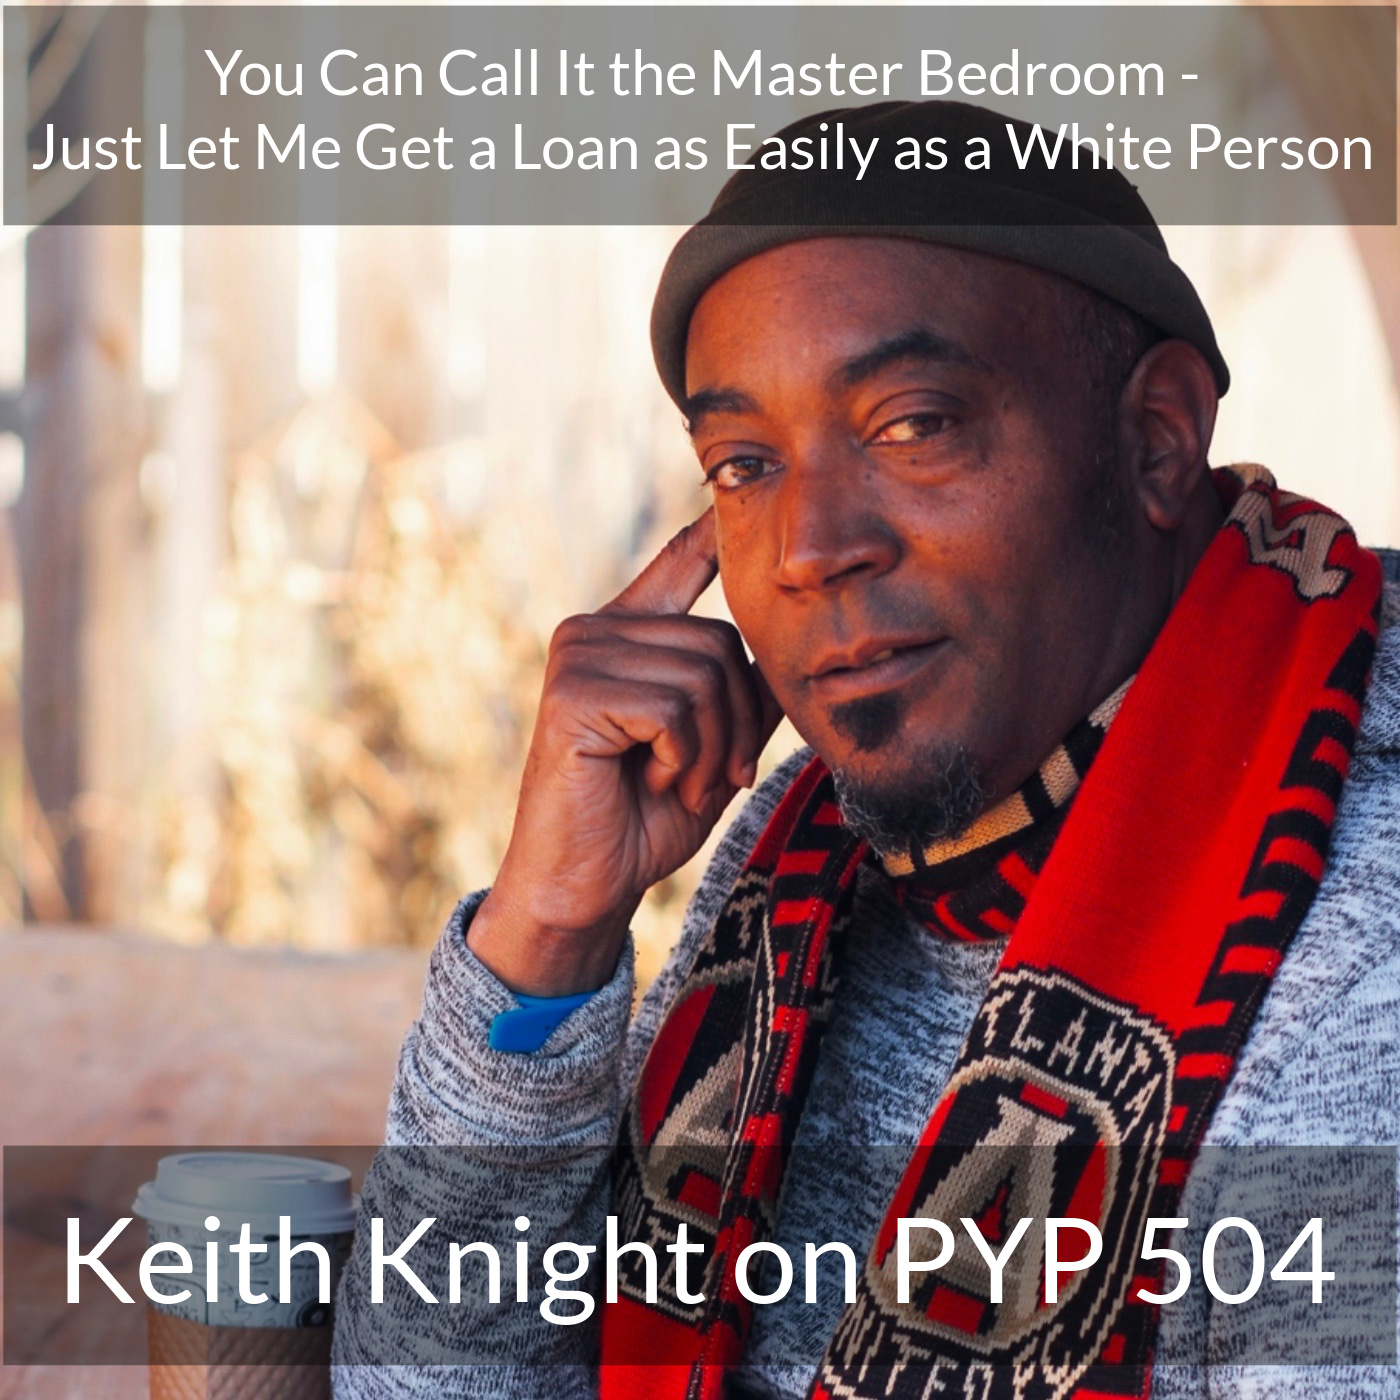 You Can Call It the Master Bedroom, Just Let Me Get a Loan as Easily as a White Person: Keith Knight on PYP 504